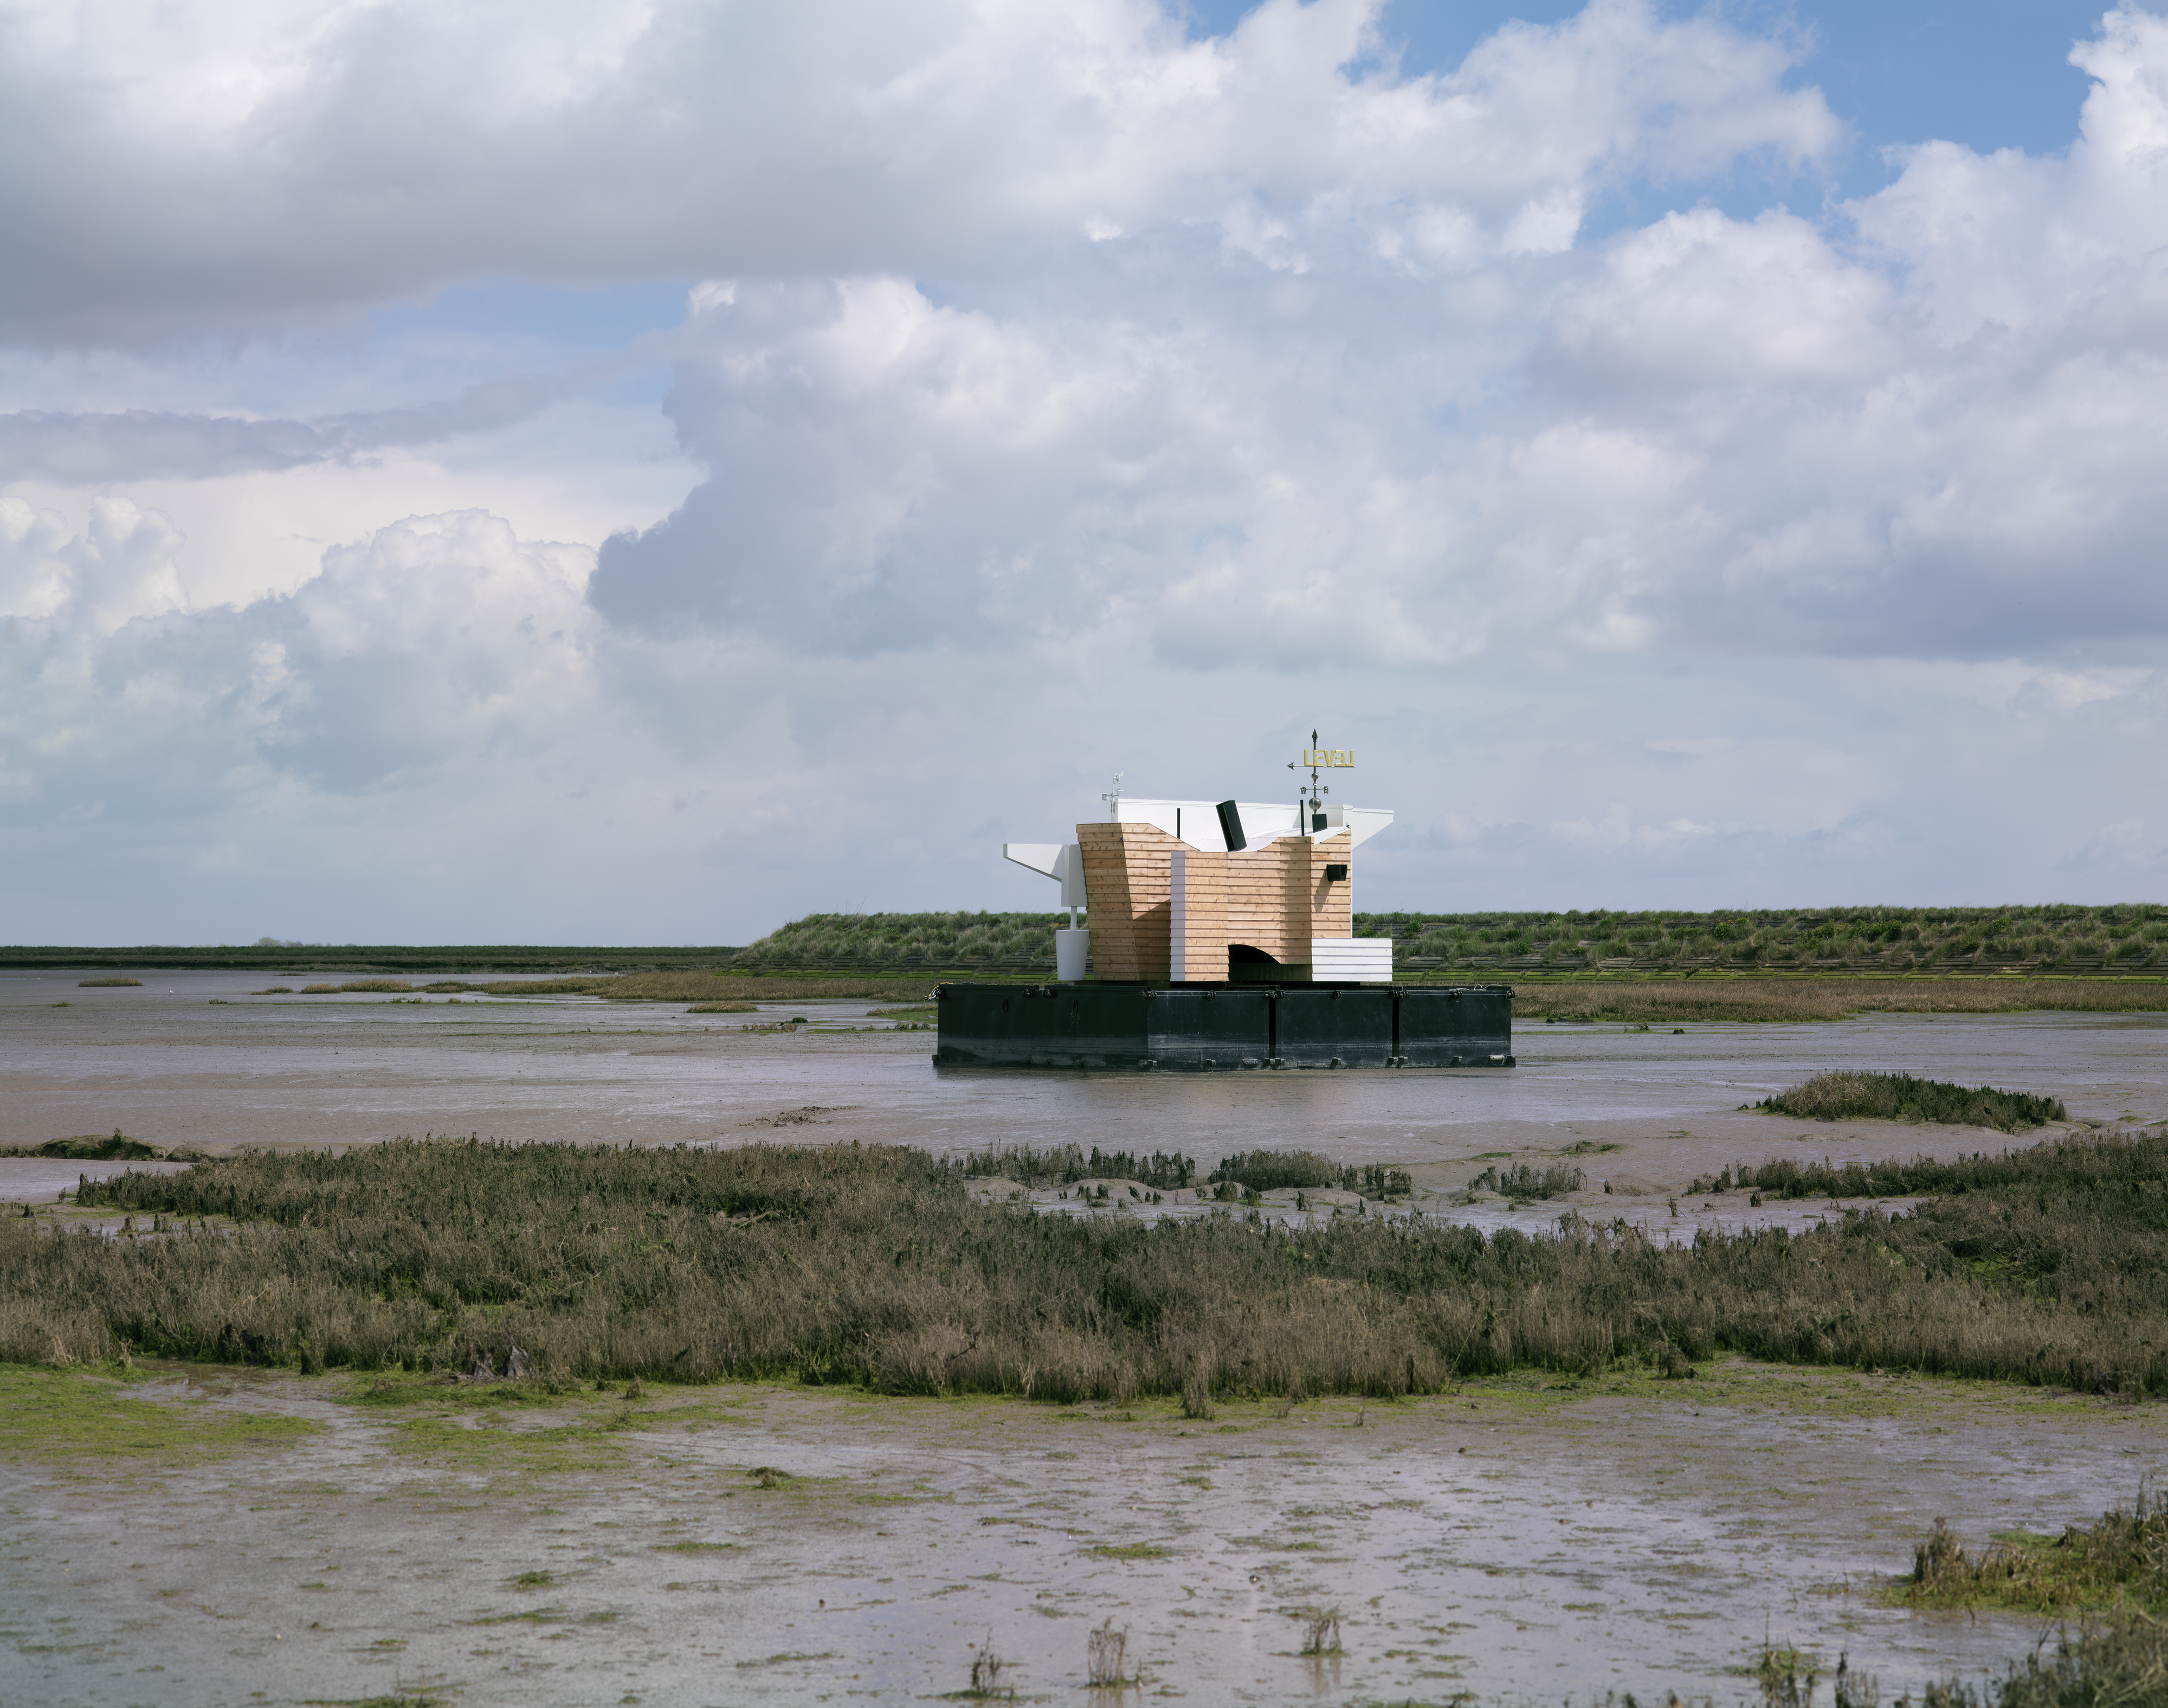 Photo of Flood House on the Thames Estuary, partly cloudy skies